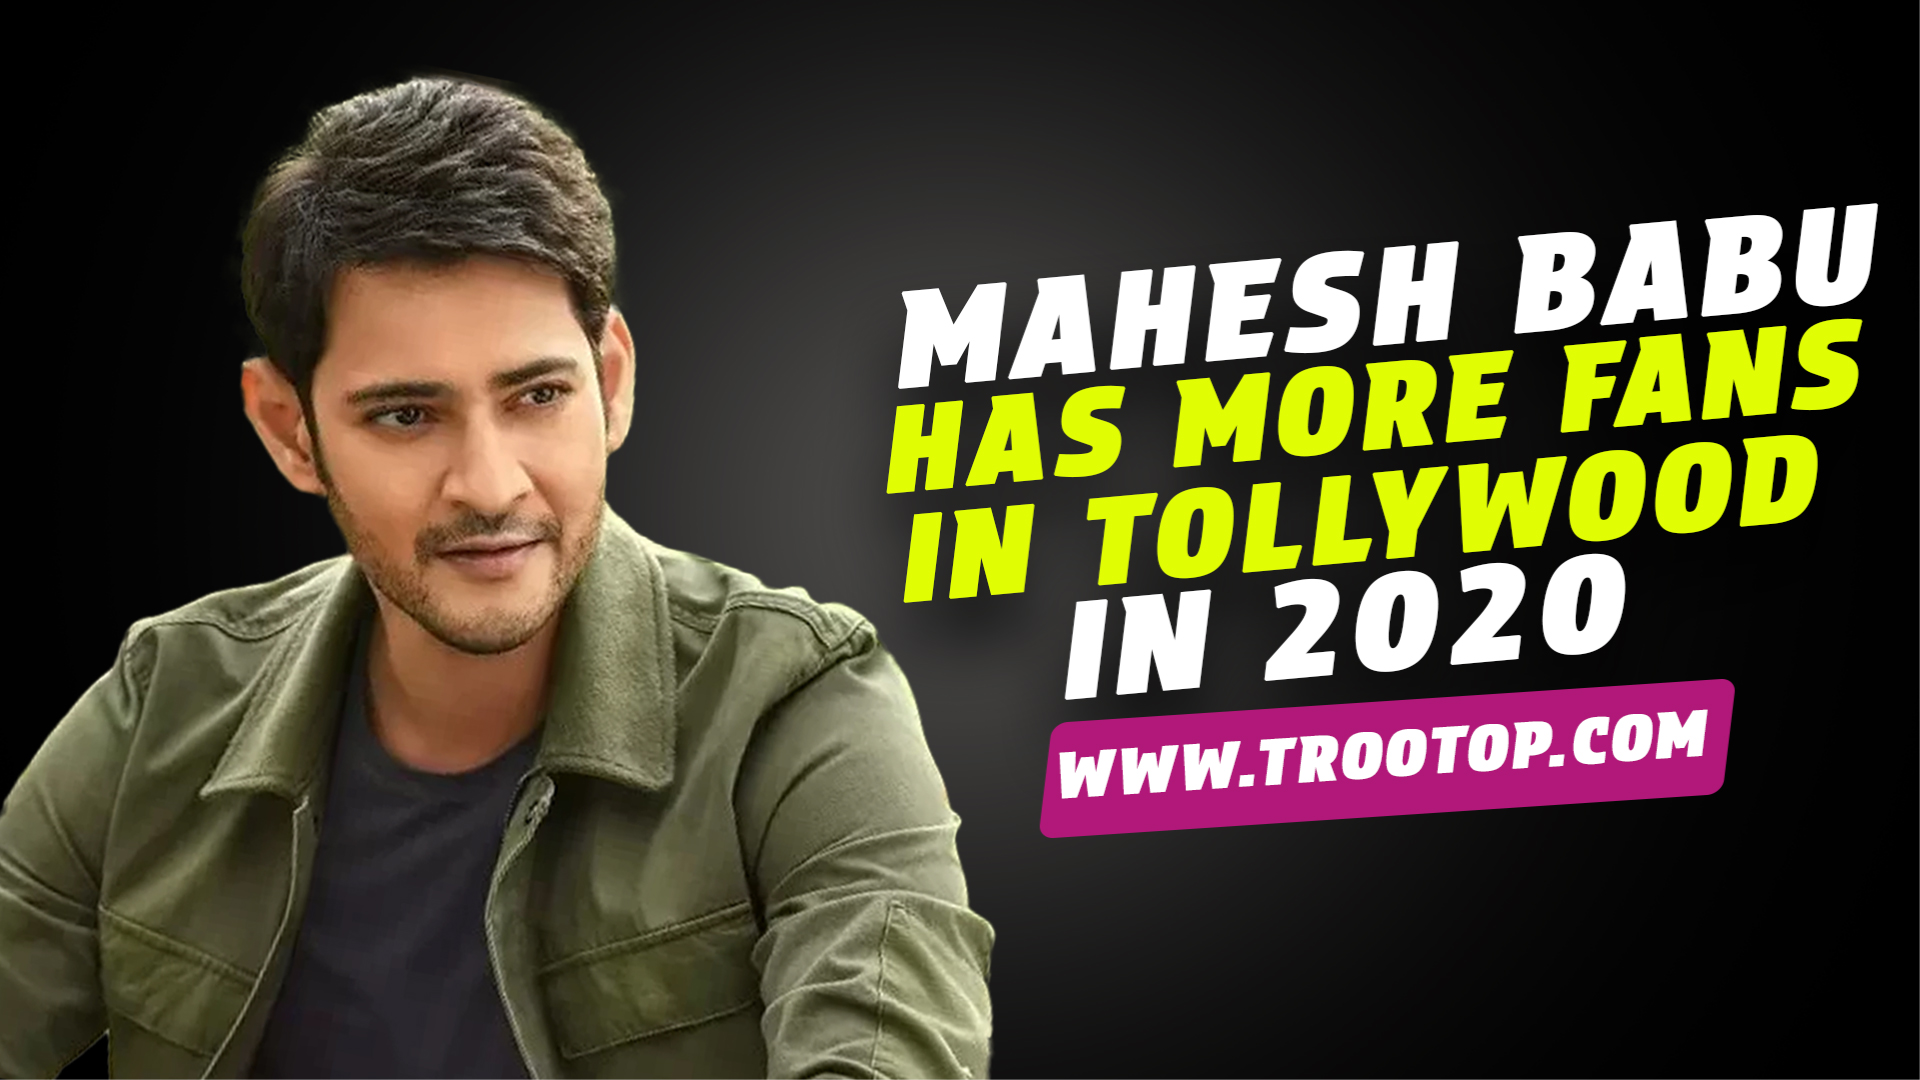 who has more fans in tollywood in 2020